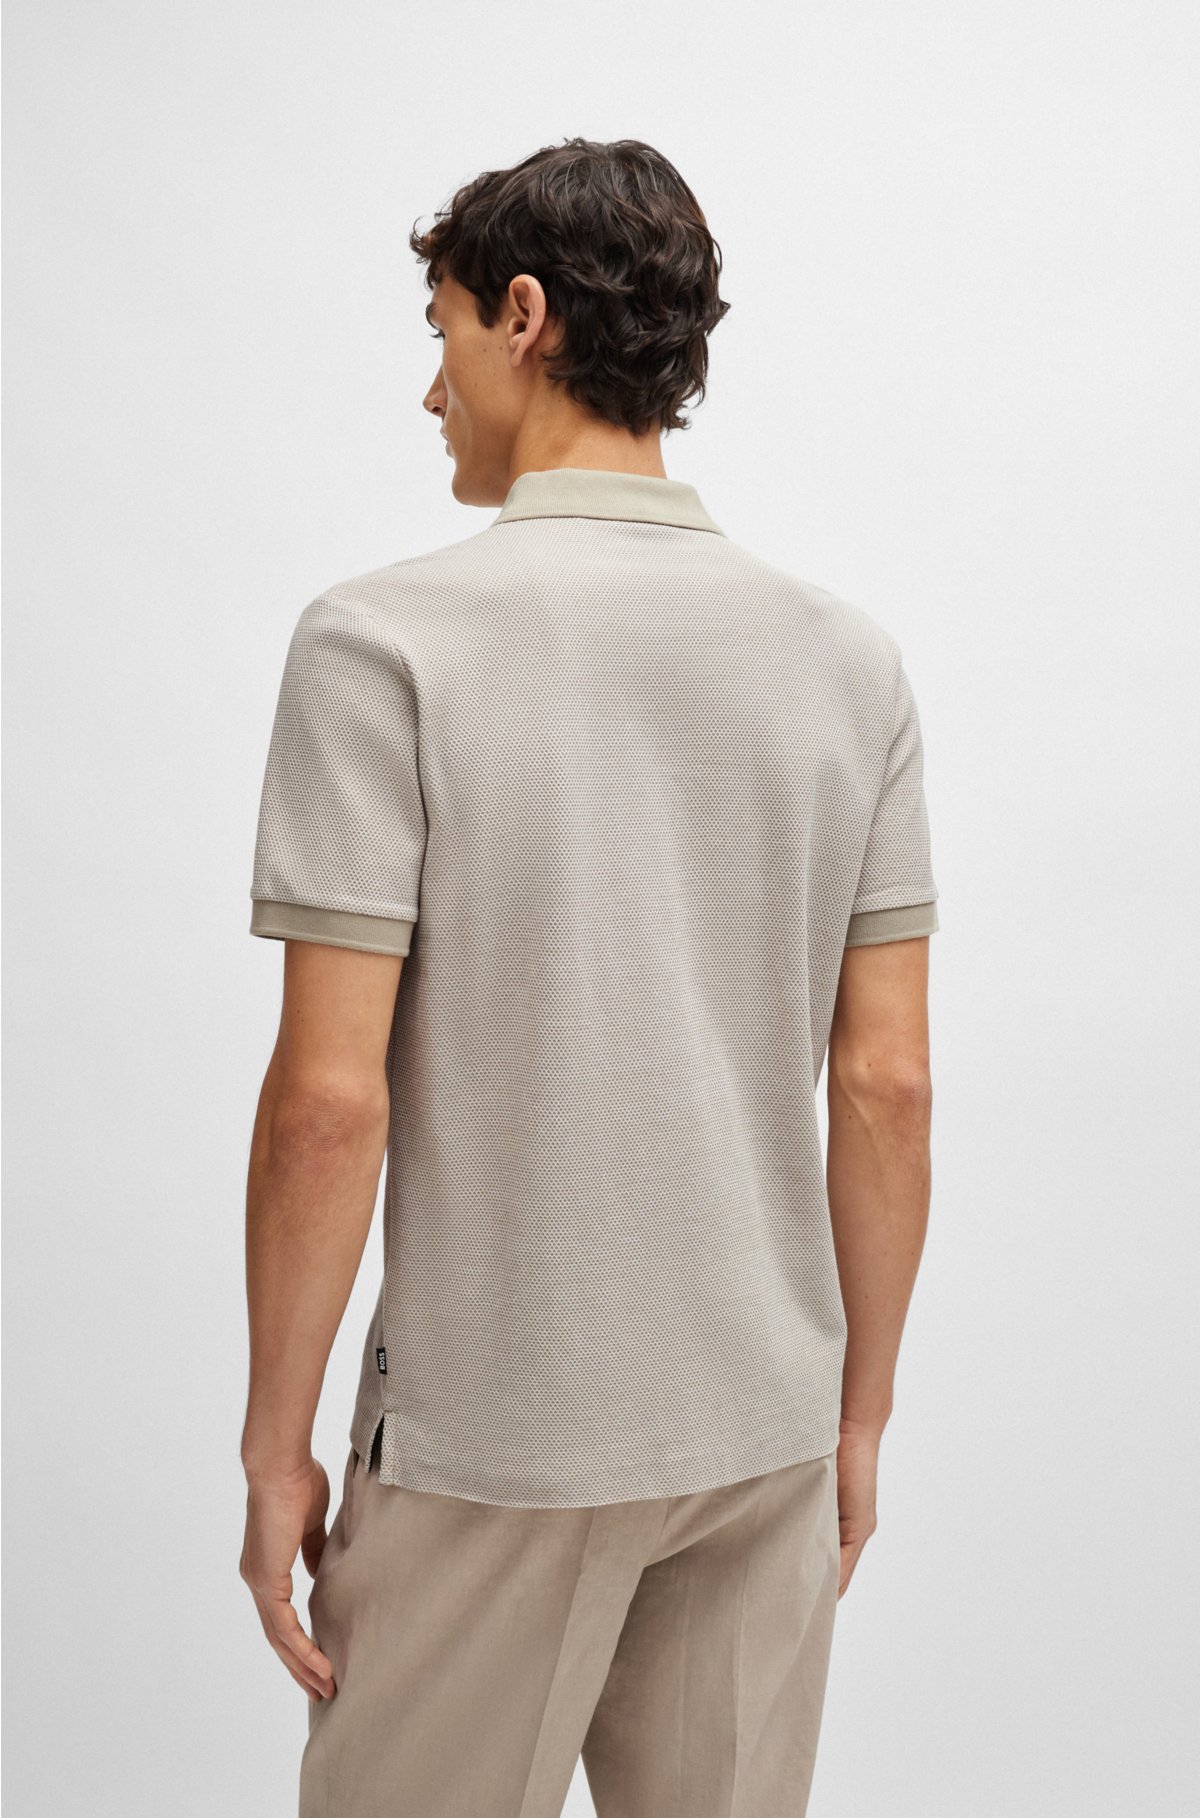 Slim-fit polo shirt in two-tone mercerised cotton, Light Beige